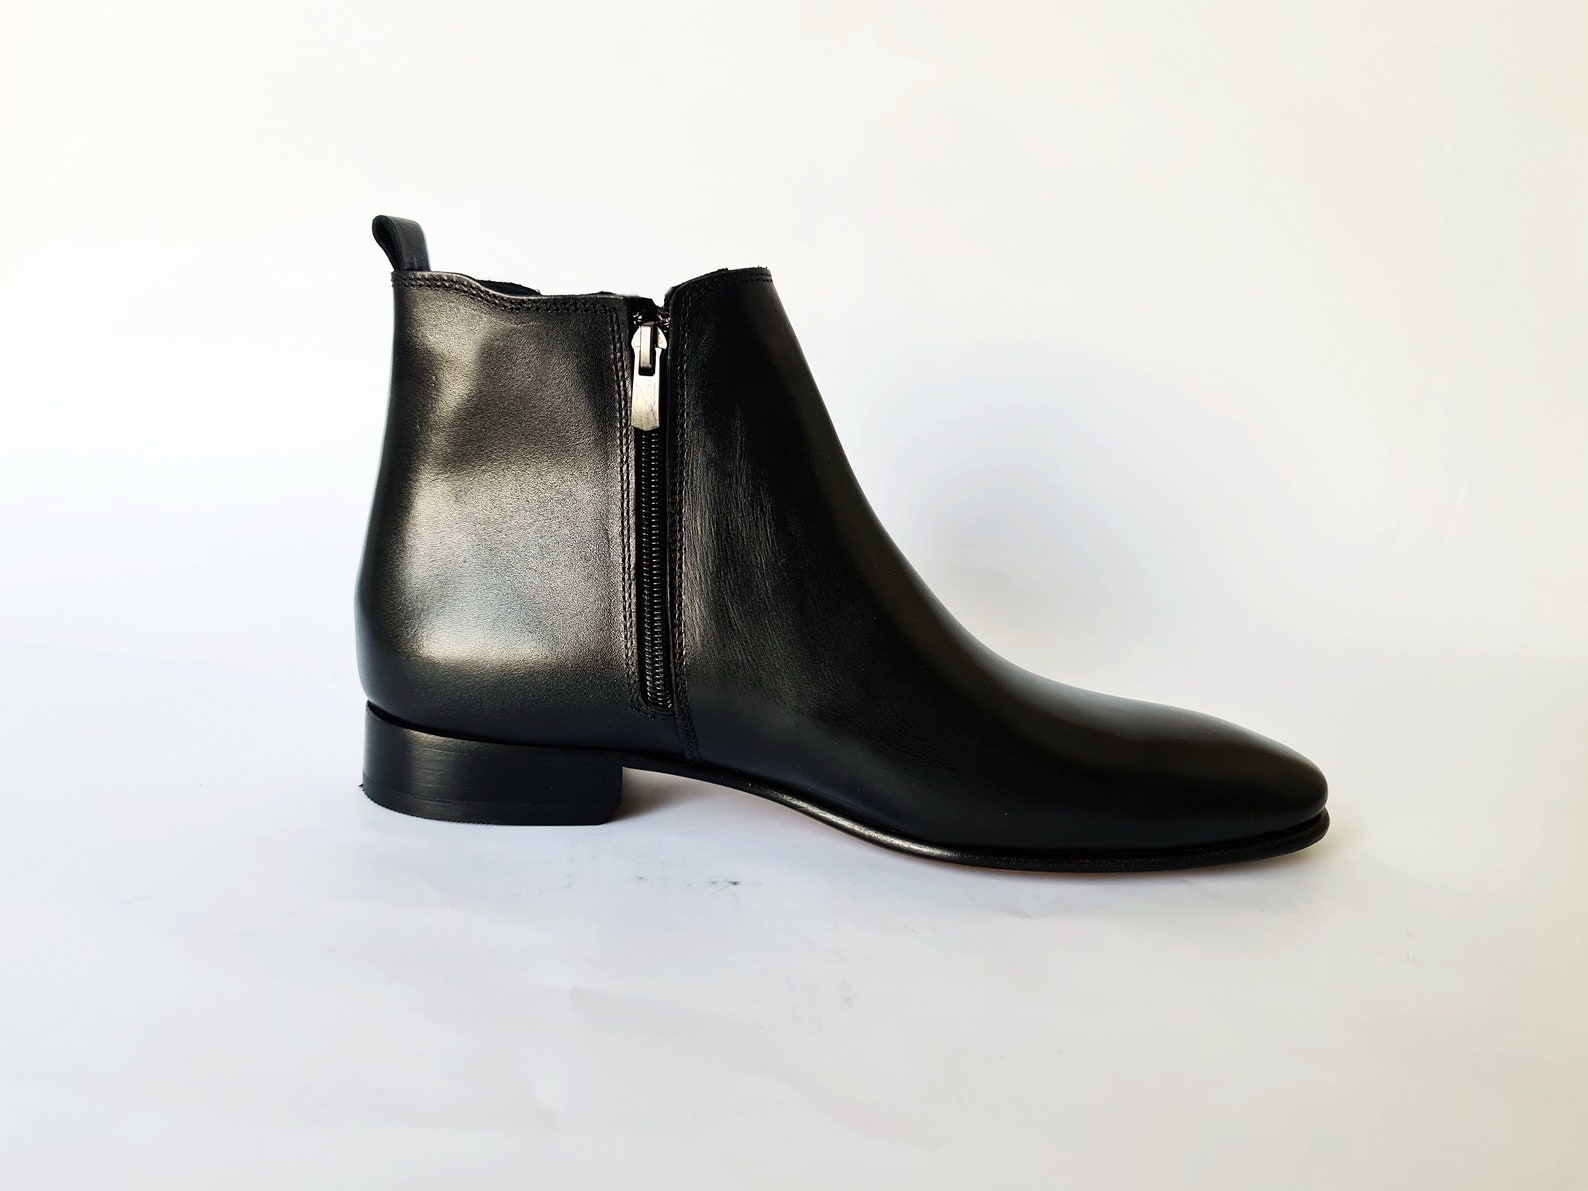 Black Chelsea Leather Boots With Leather Sole & Elastic Insert - Etsy